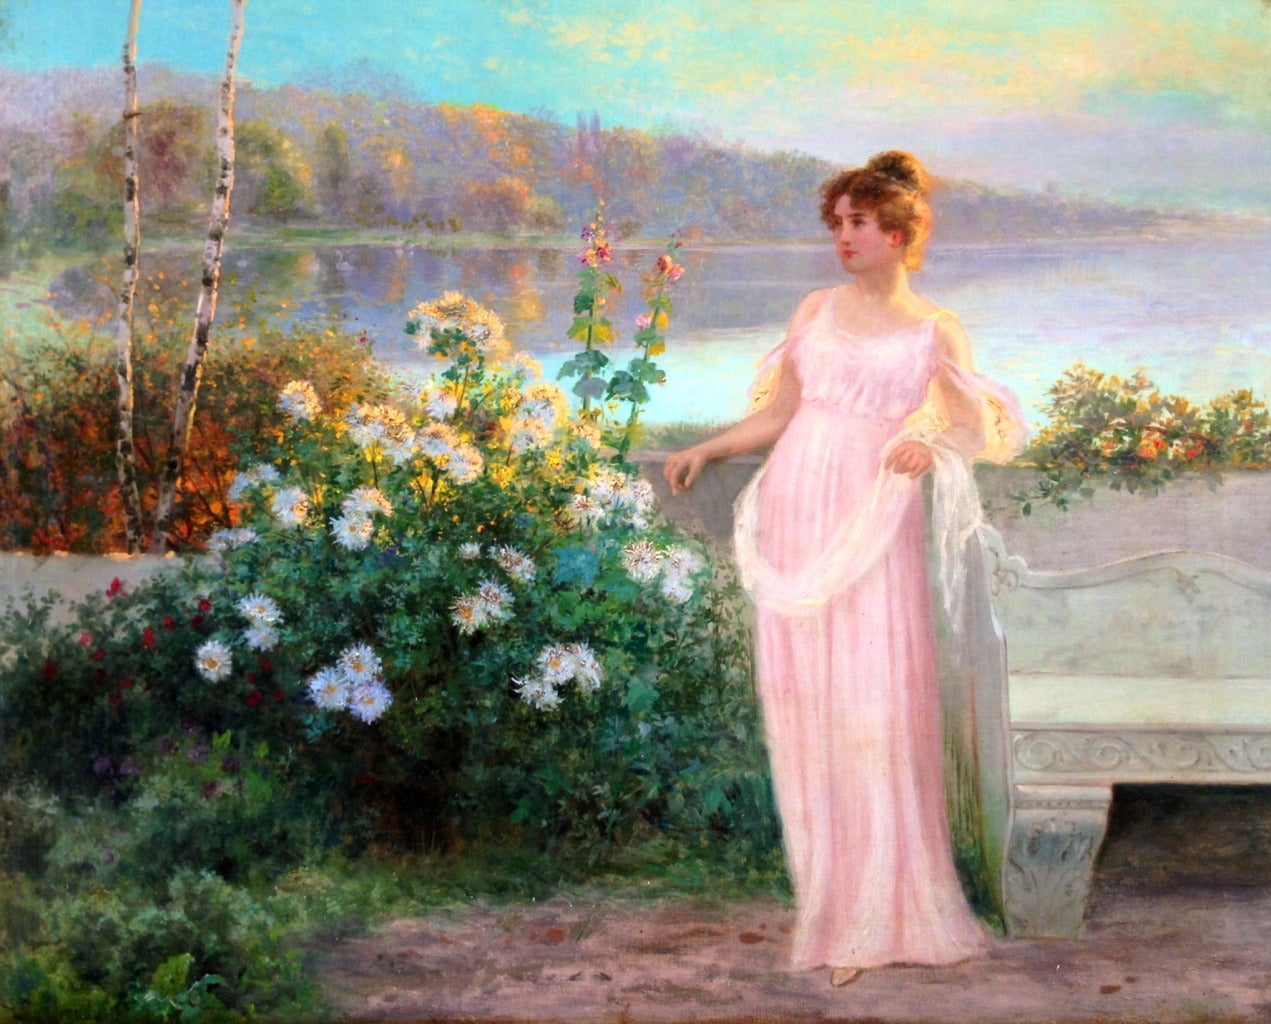 “Lady of the Lake”